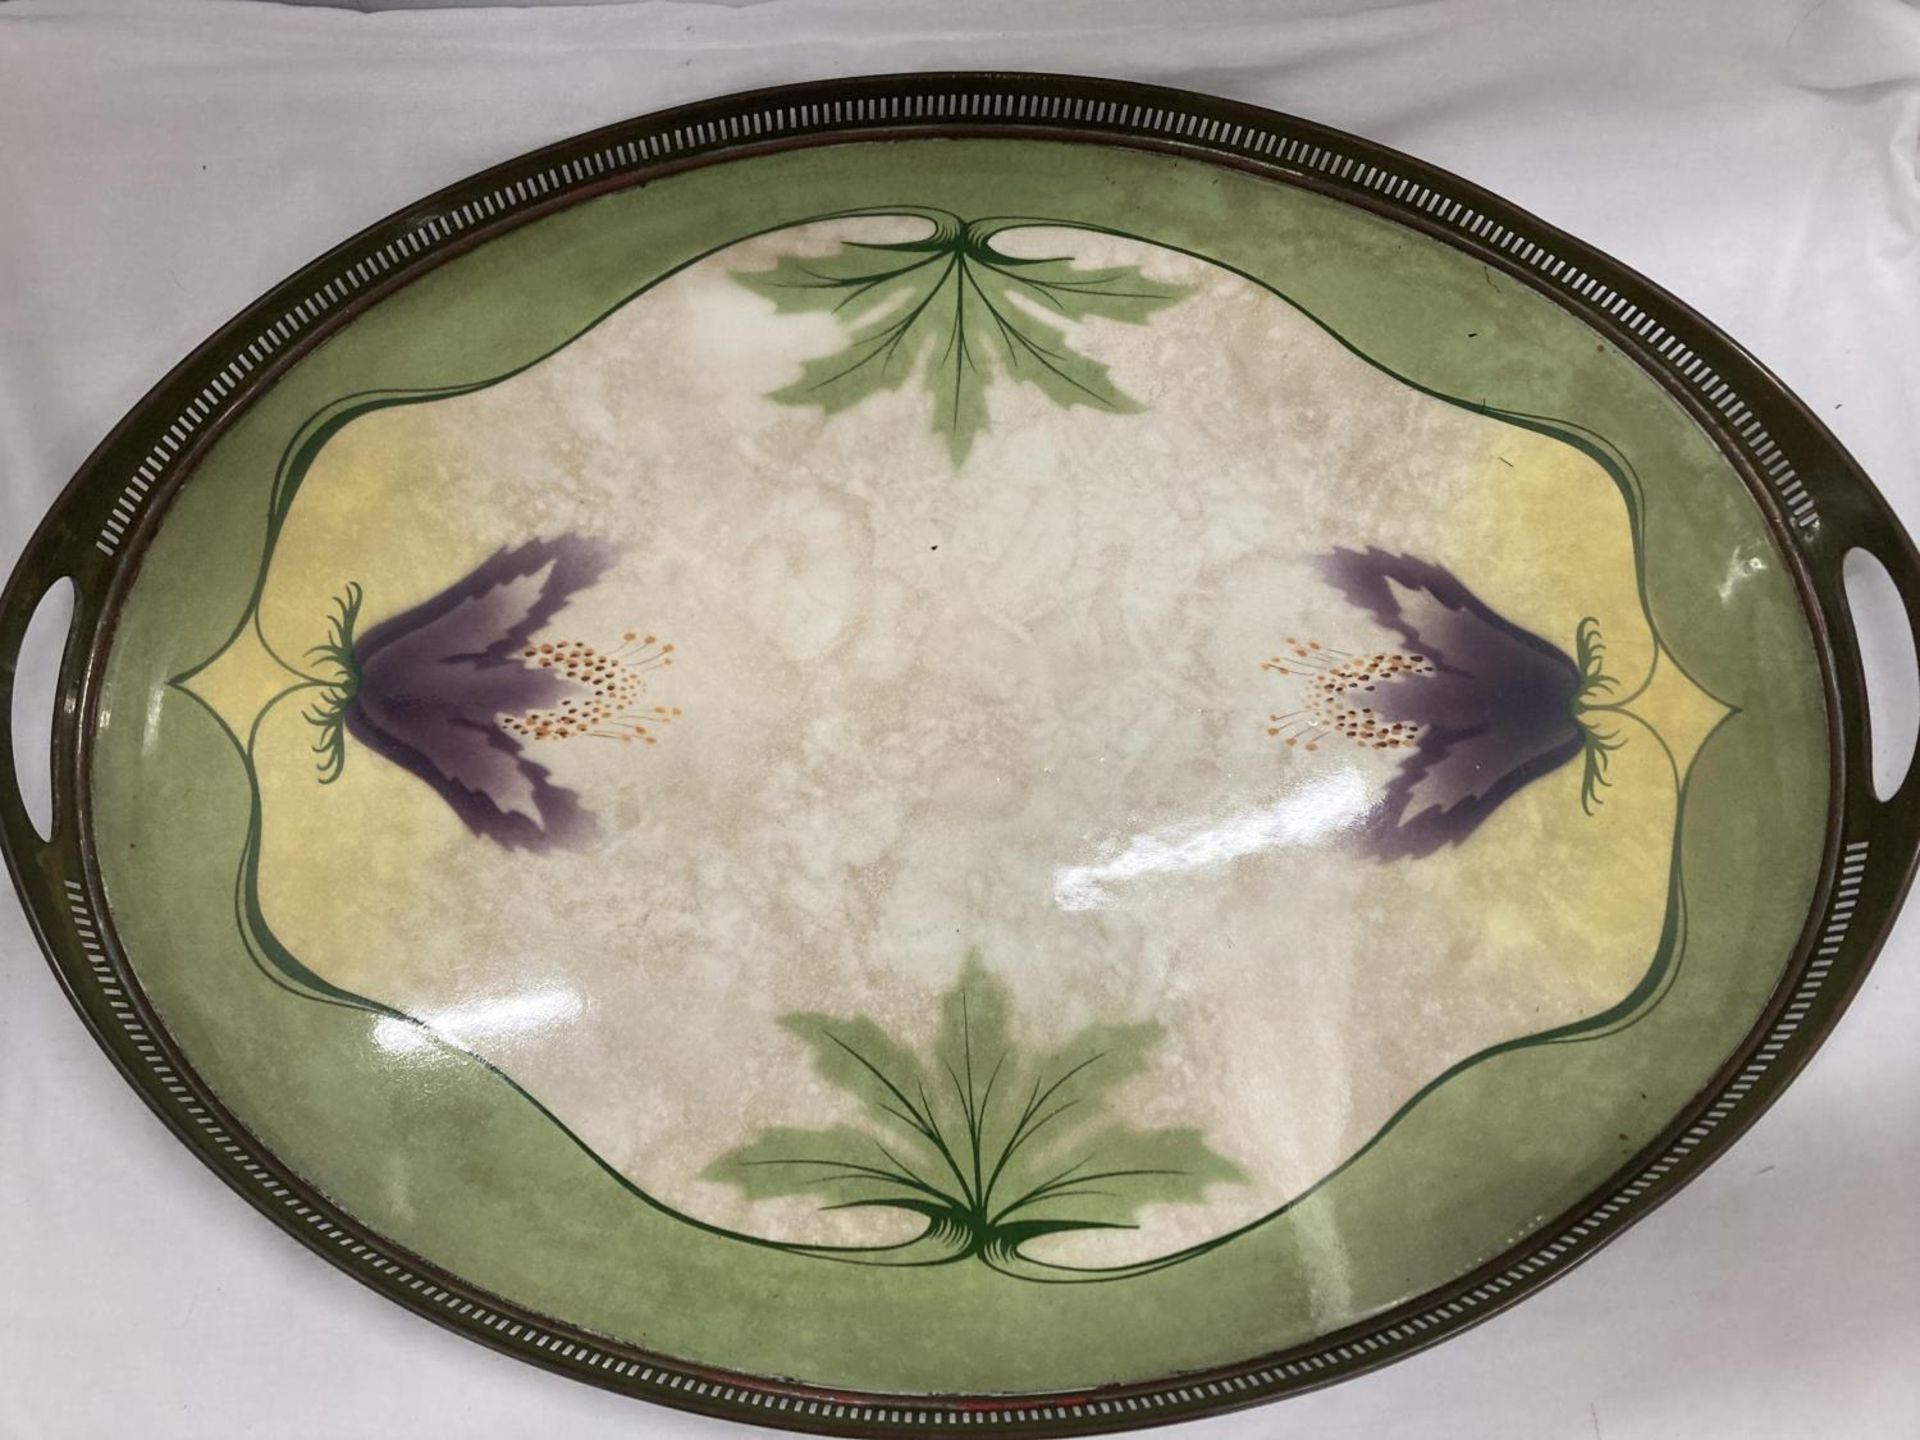 AN ART NOUVEAU STYLE BRASS AND CERAMIC TRAY WITH GALLERIED SIDES ADORNED WITH FLOWERS AND LEAVES - Image 2 of 4